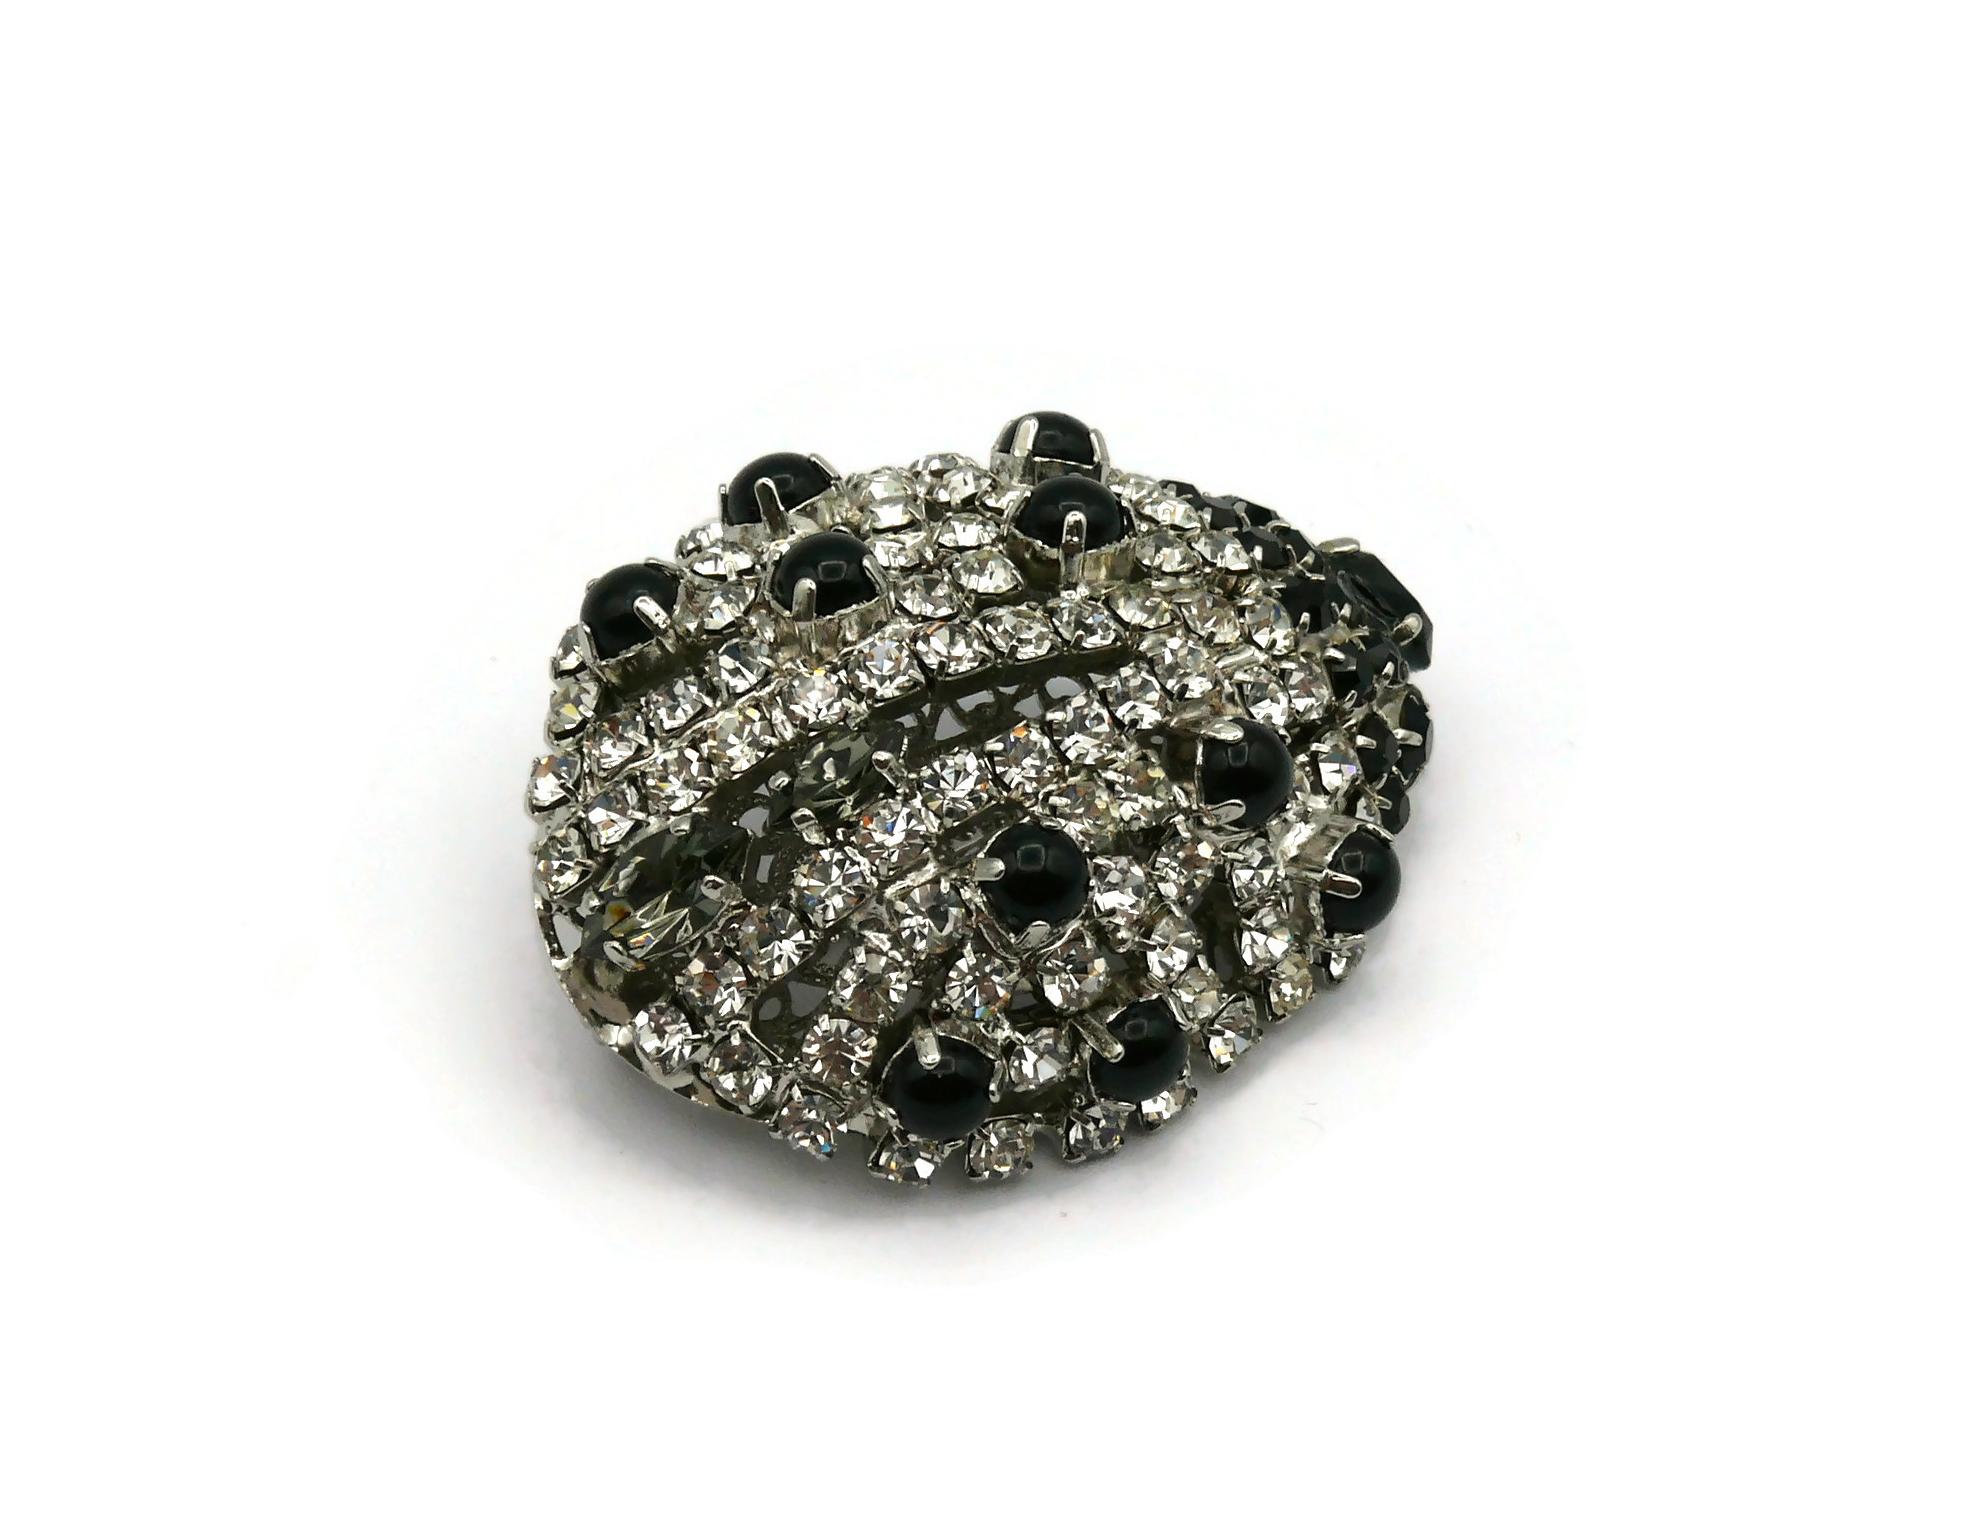 CHRISTIAN LACROIX (Attributed To) Vintage Jewelled Ladybug Brooch For Sale 3